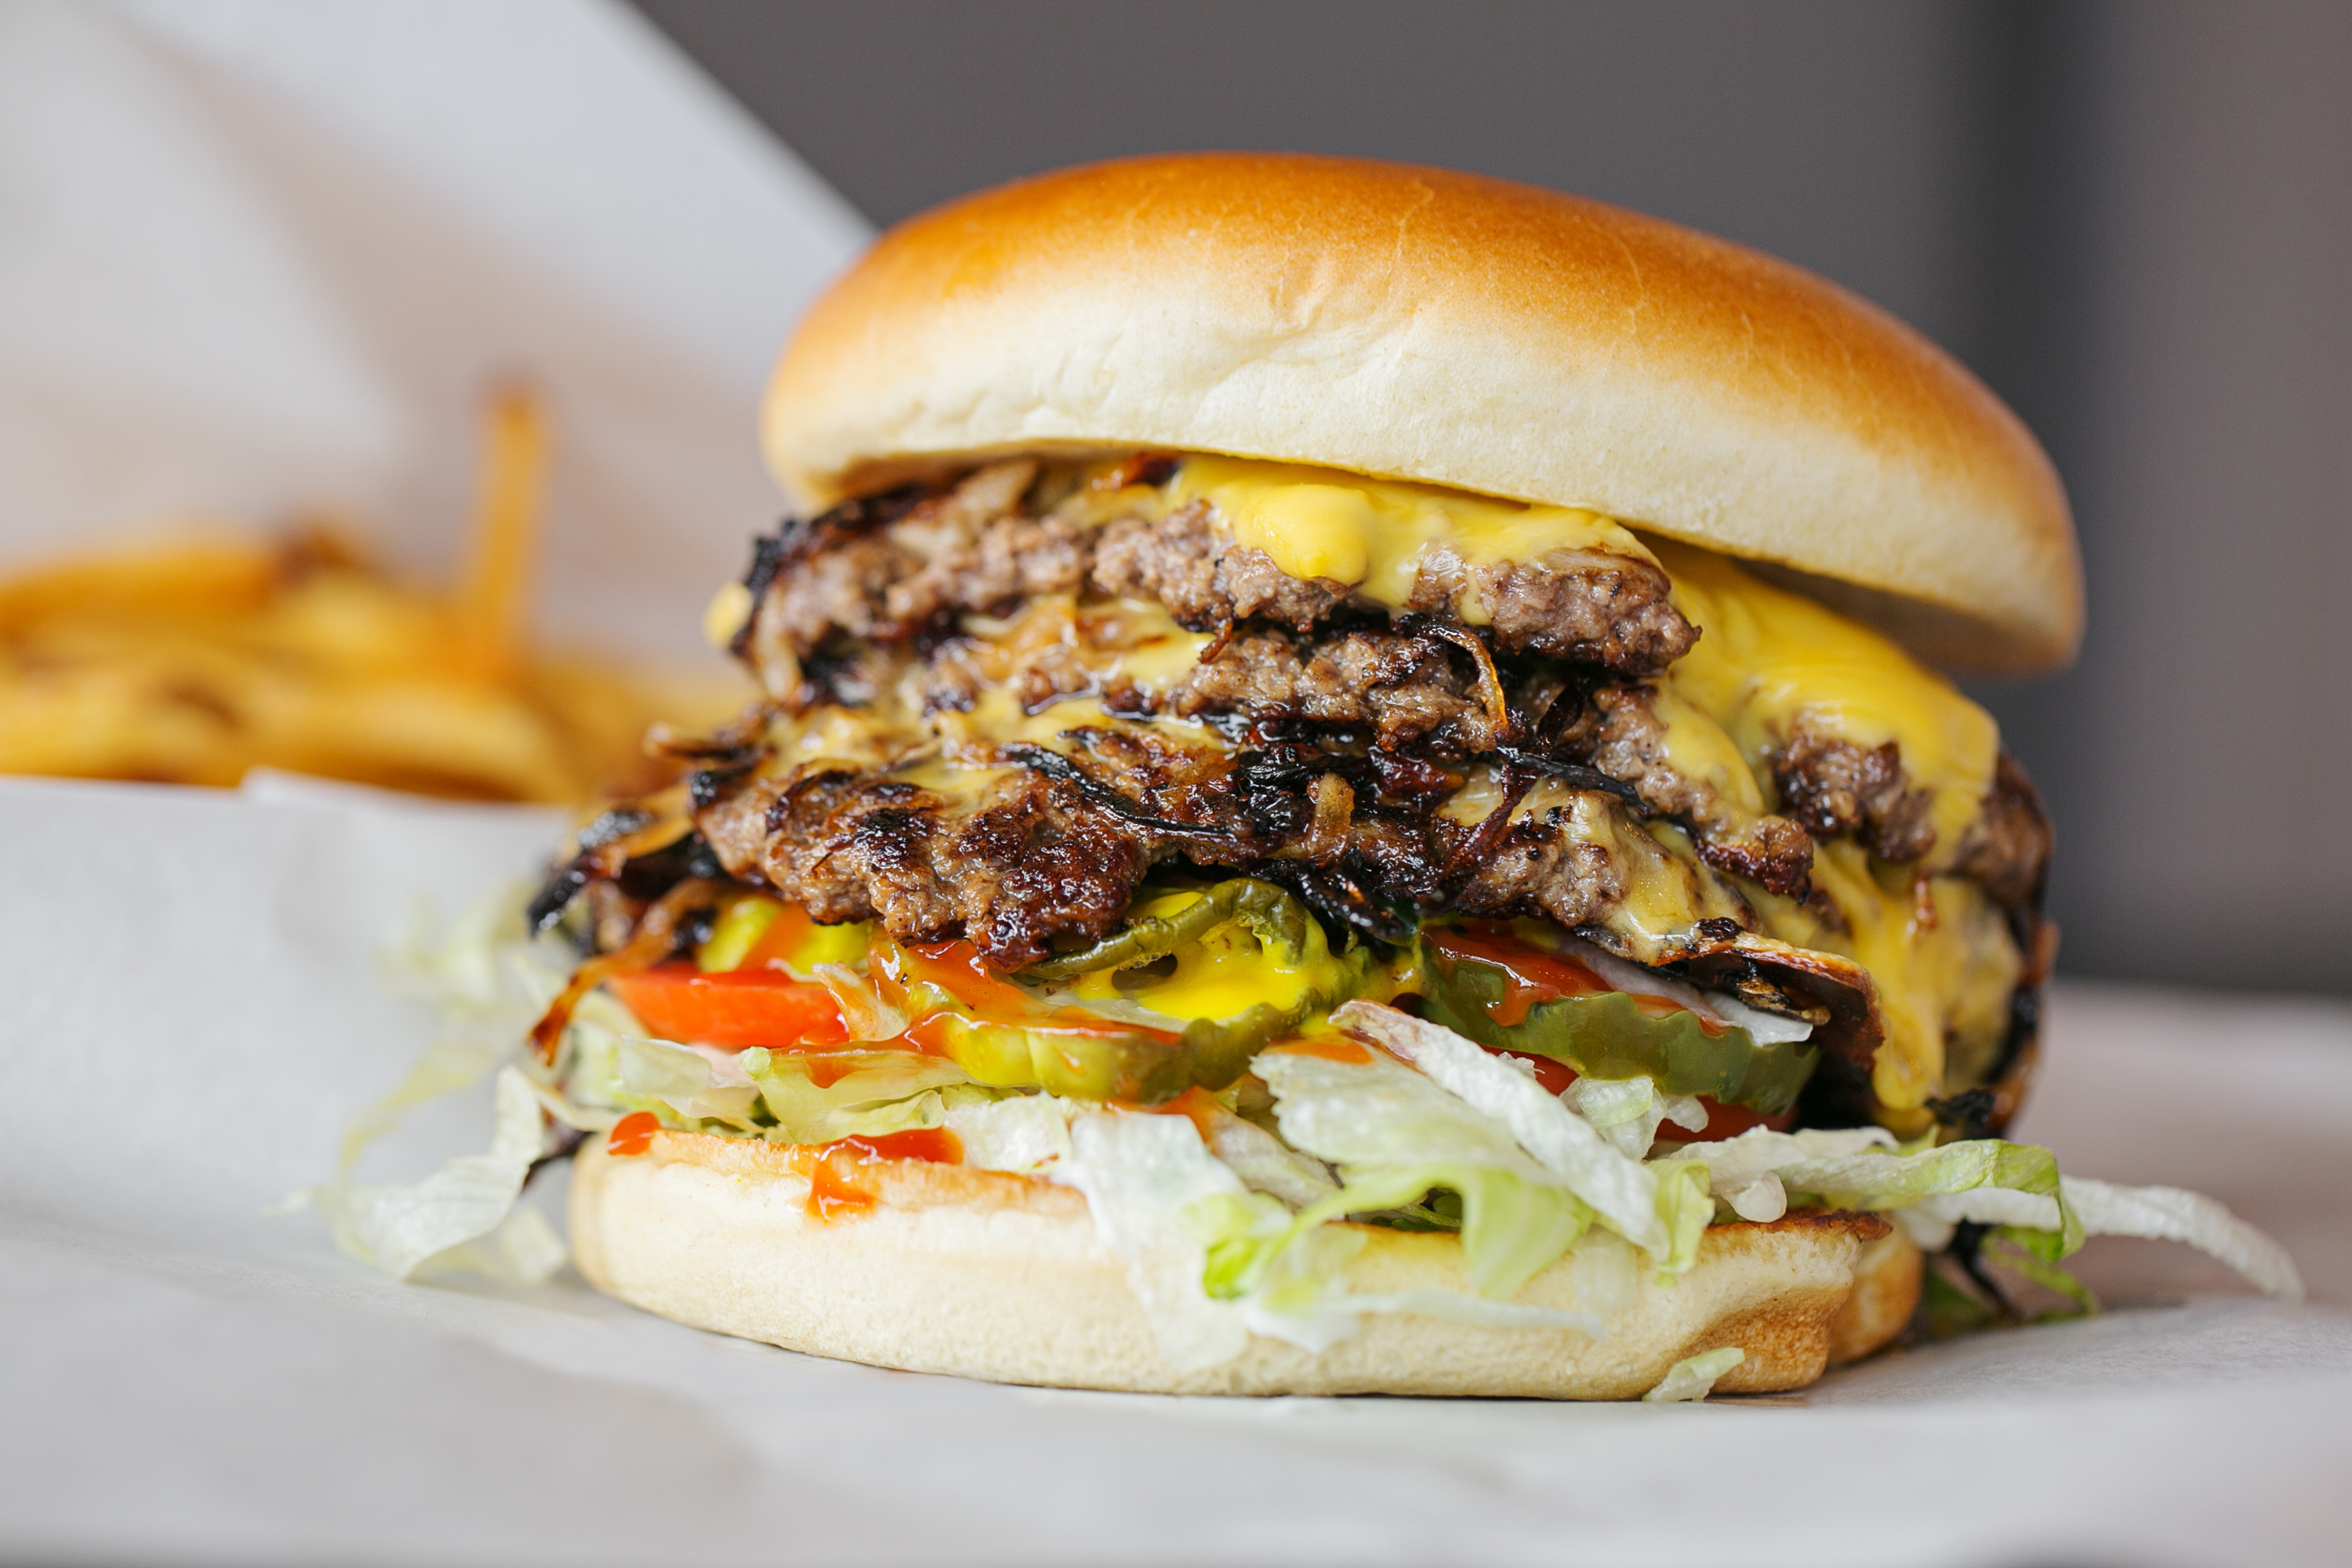 A well-stacked double cheeseburger.